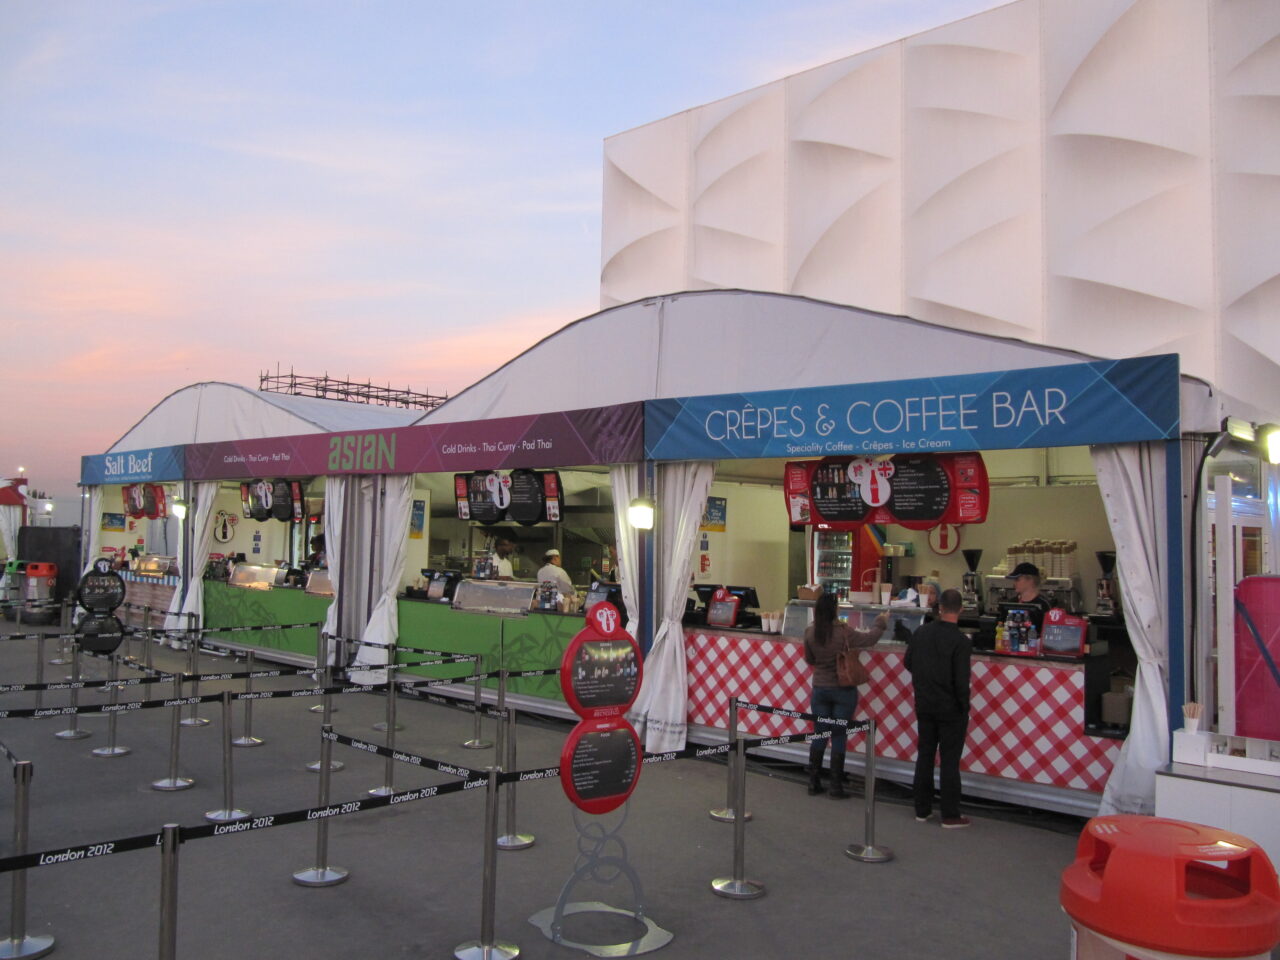 Temporary single deck structures for food outlets at London 2012, provided by GL events UK